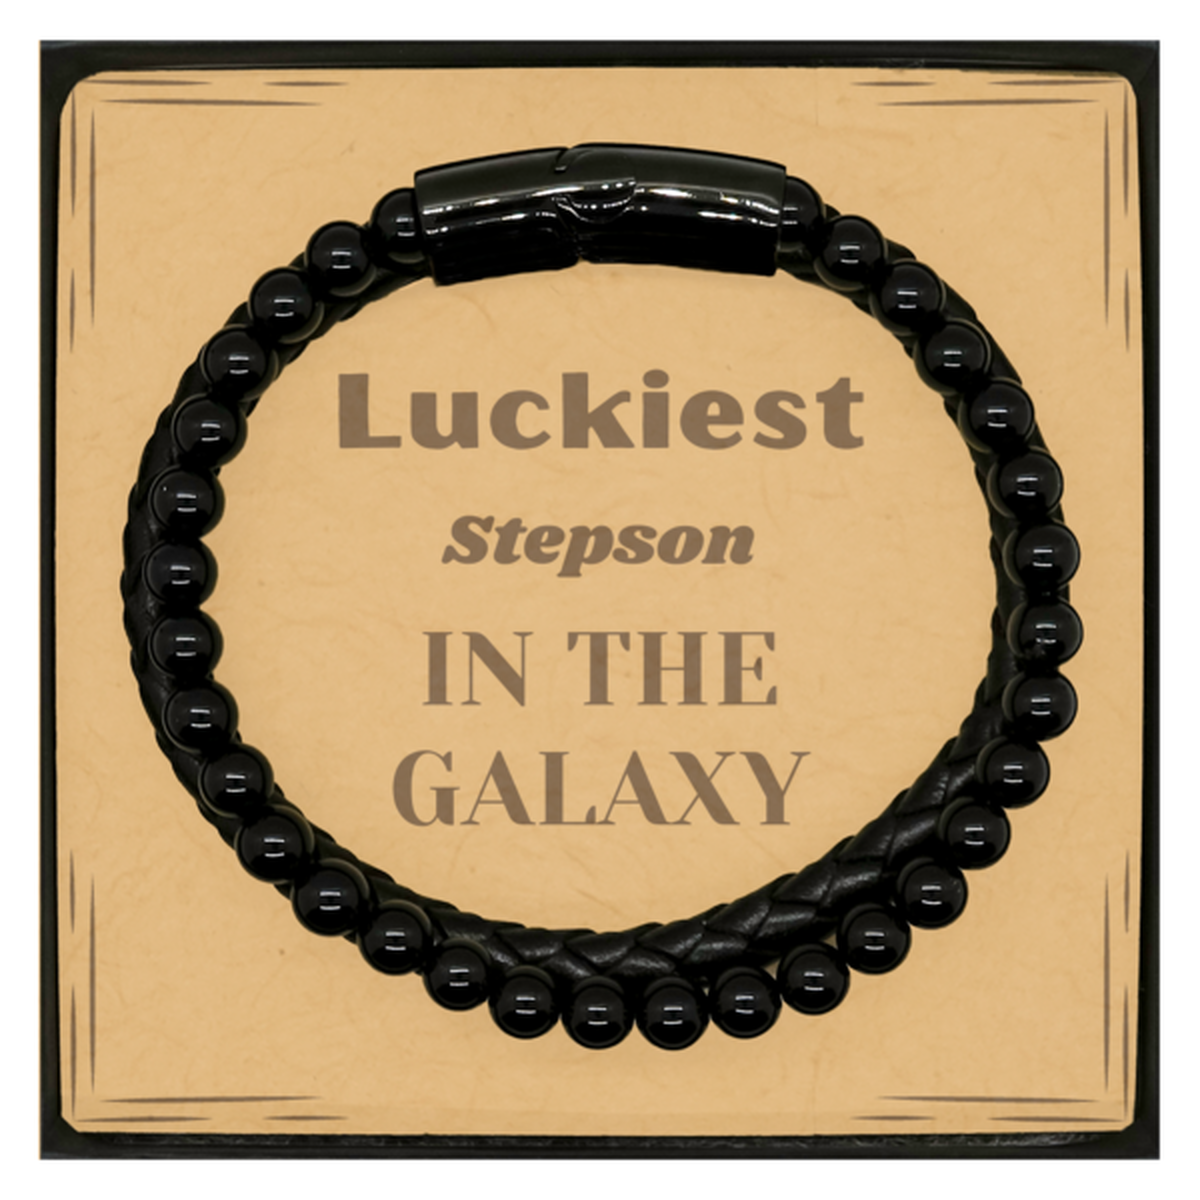 Luckiest Stepson in the Galaxy, To My Stepson Message Card Gifts, Christmas Stepson Stone Leather Bracelets Gifts, X-mas Birthday Unique Gifts For Stepson Men Women